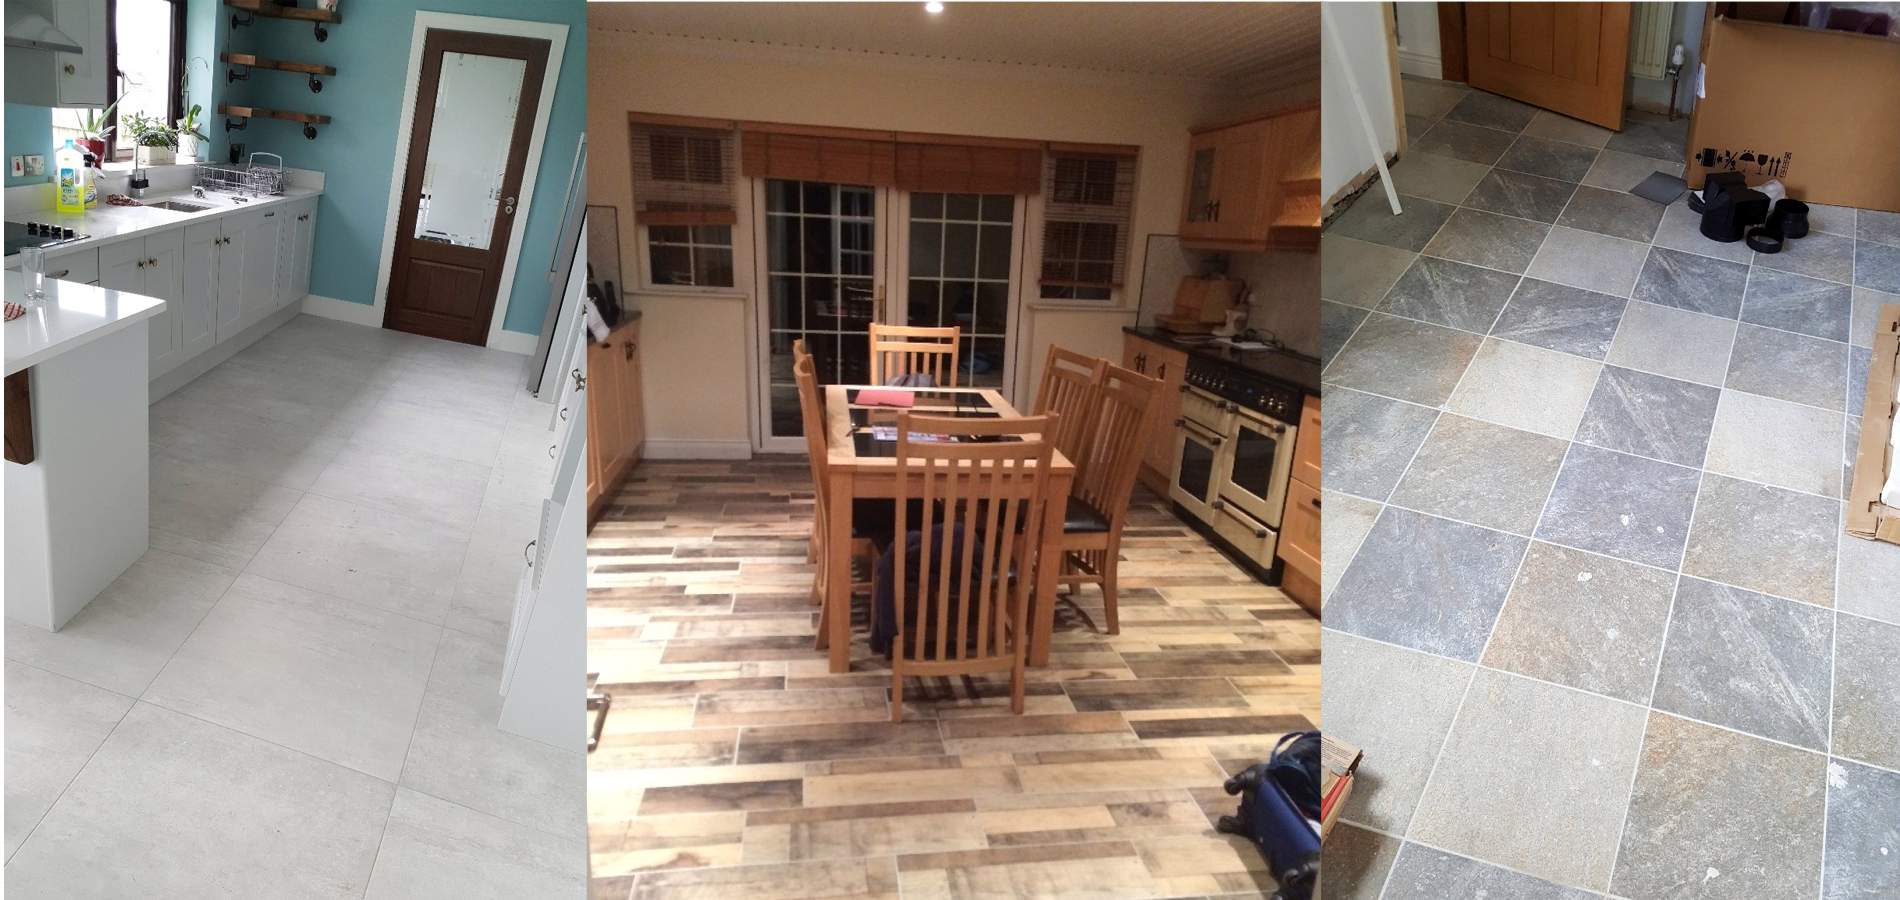 Floor Tiles by North West Tiles & Timber, Co. Leitrim, Ireland